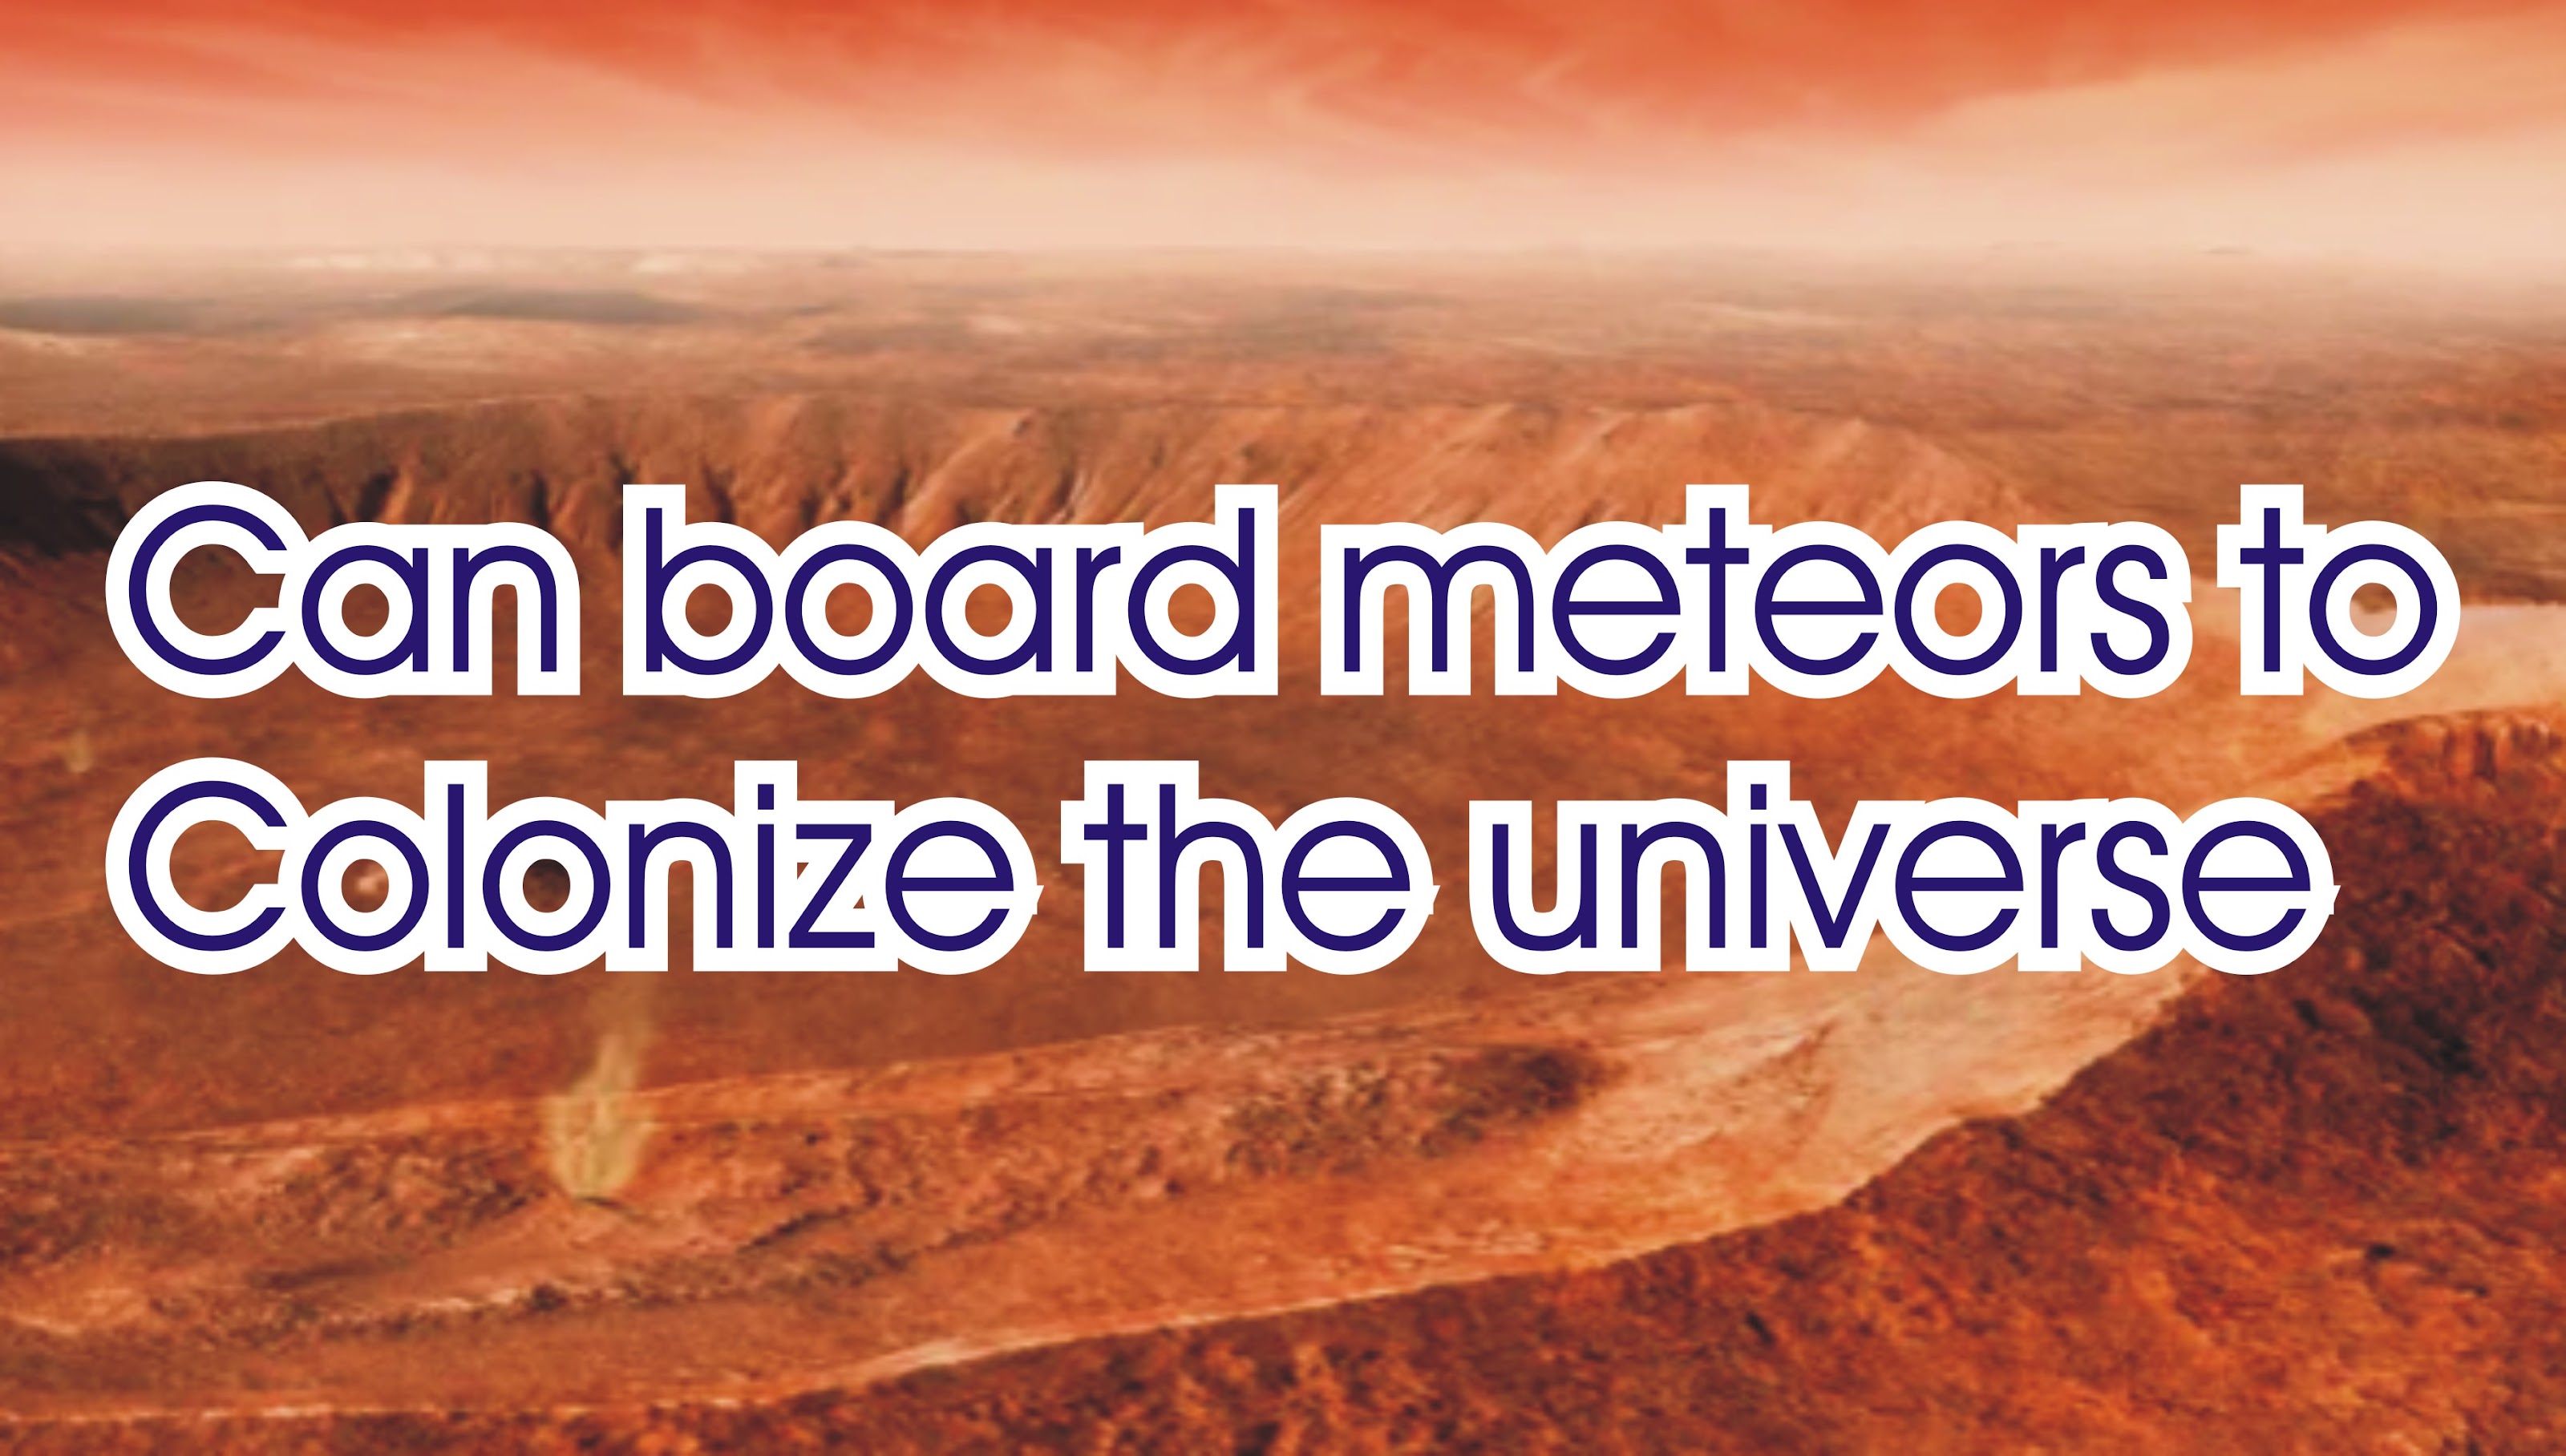 Can board meteors to colonize the universe